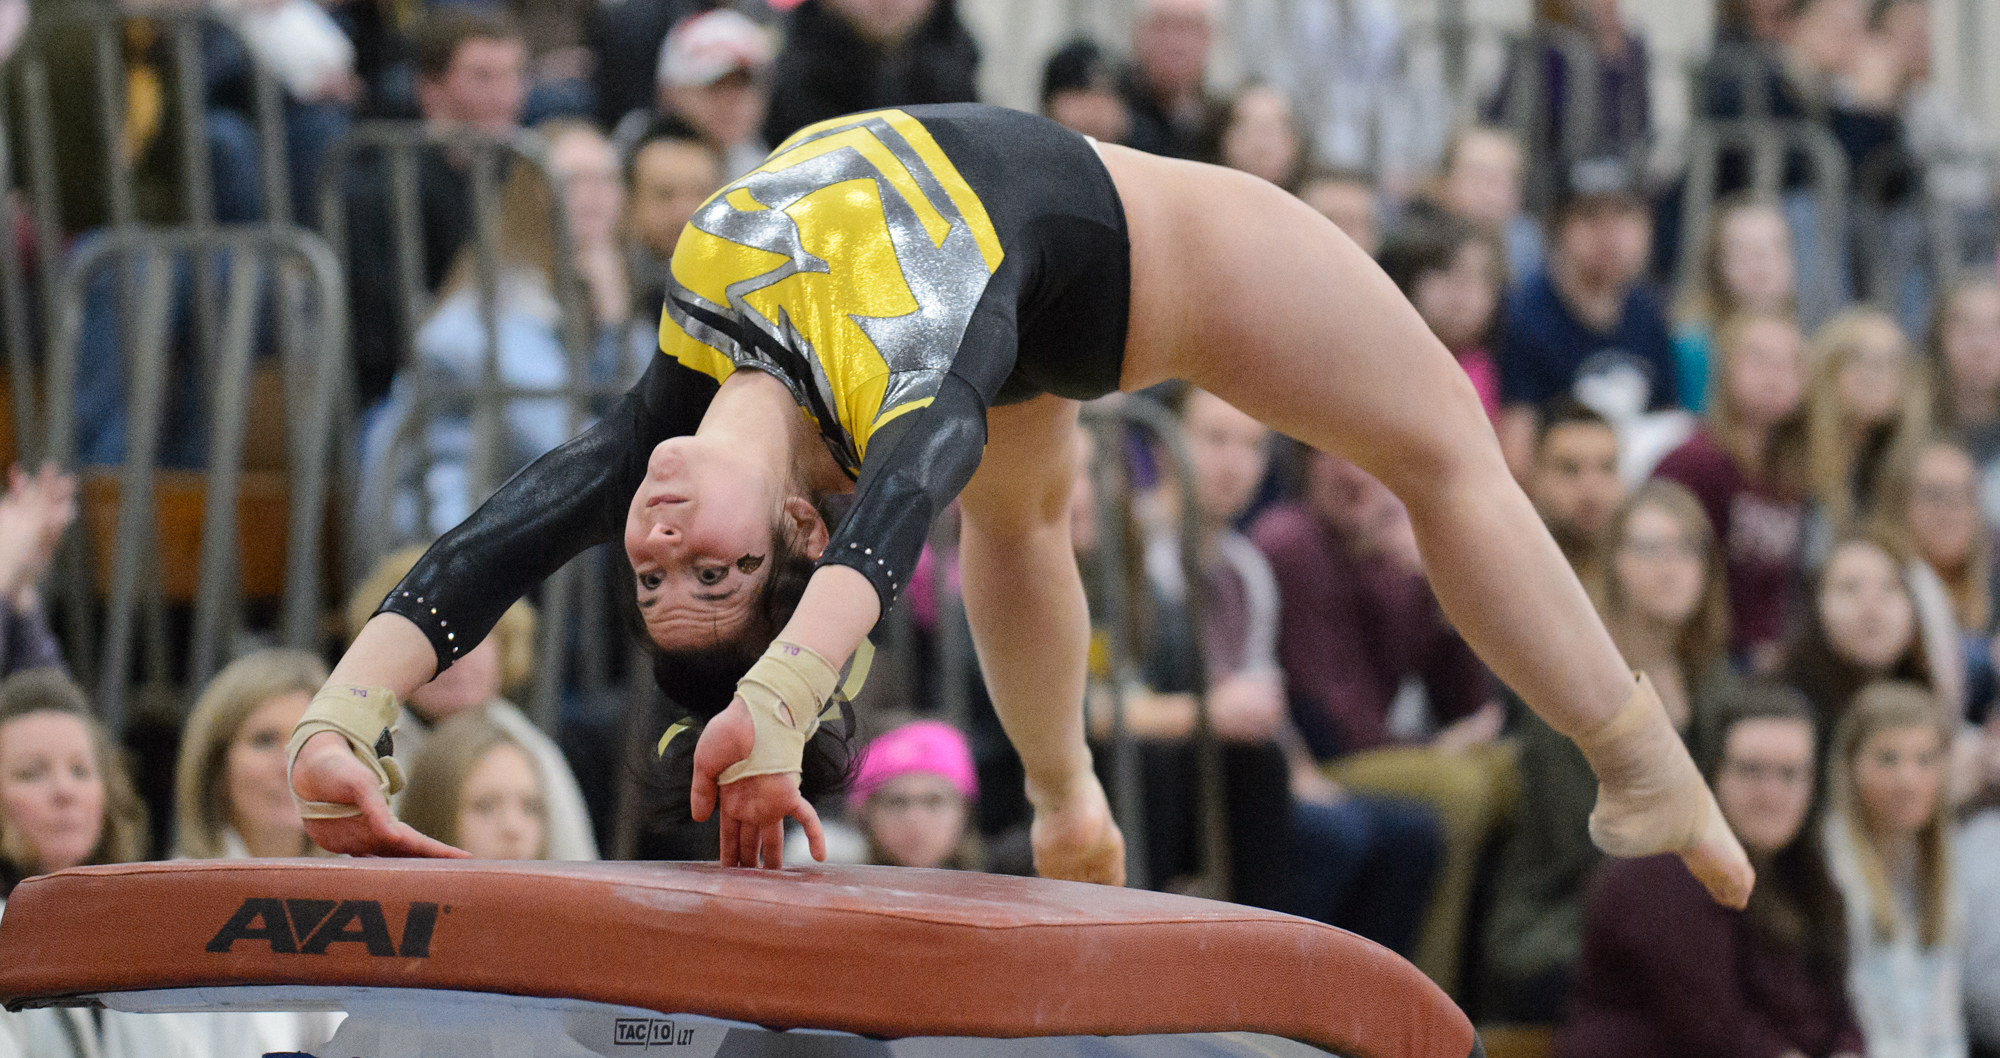 Dana LoCascio recorded a season high with her score of 9.325 on the vault.